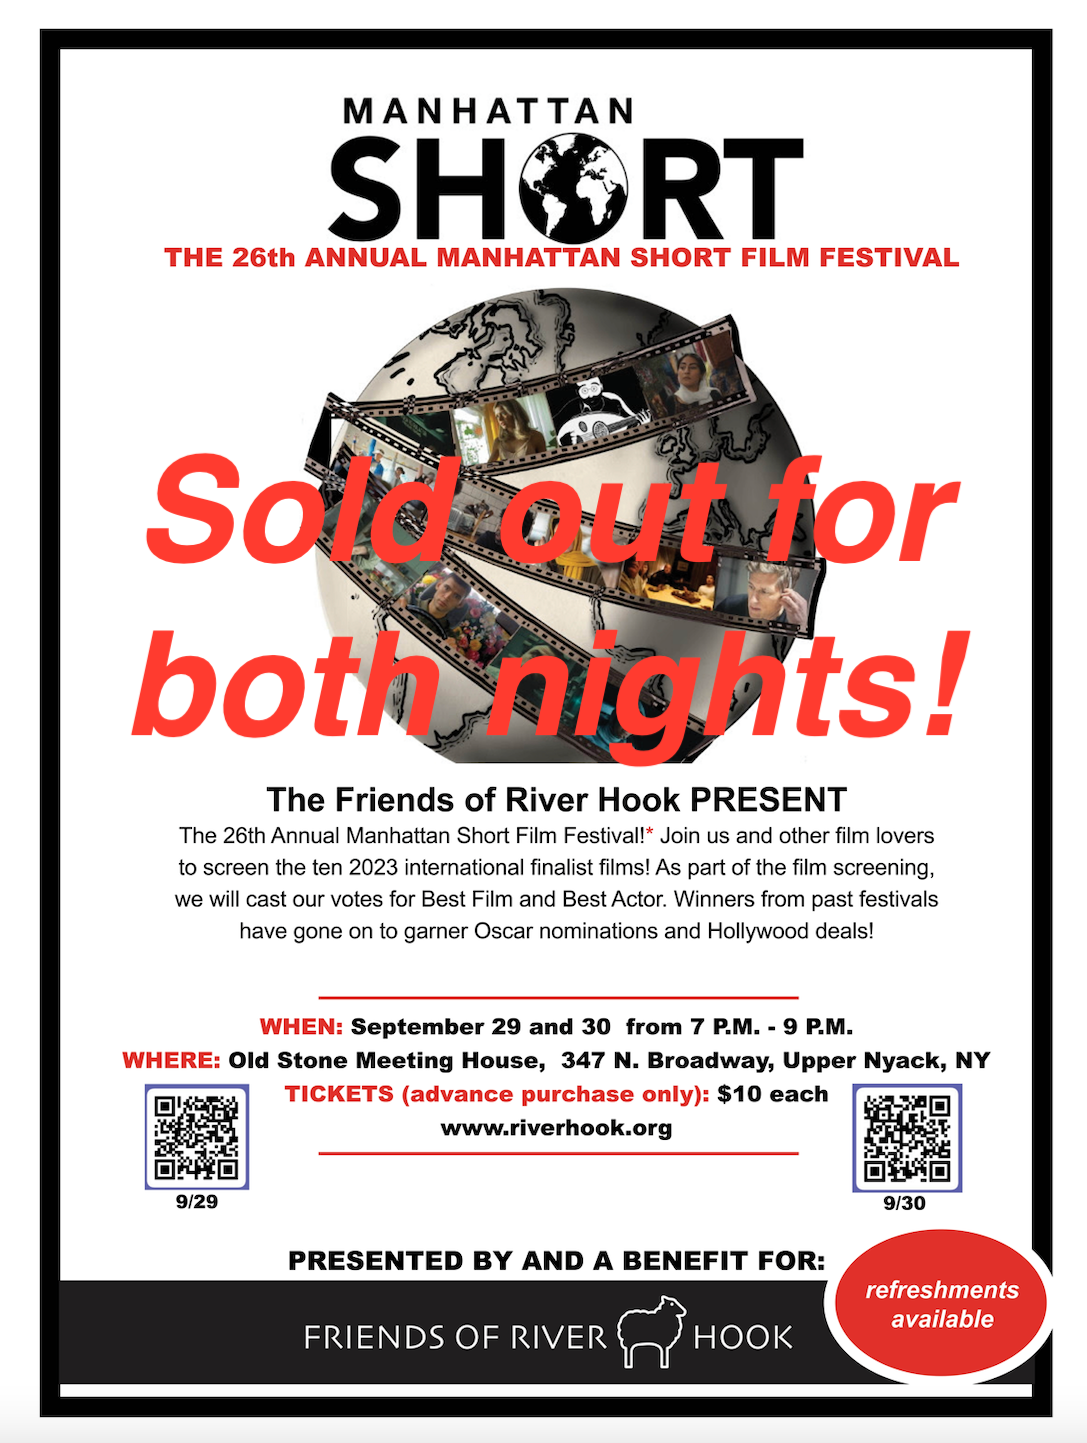 SOLD OUT!  The Friends of River Hook PRESENT The 26th Annual Manhattan Short Film Festival!